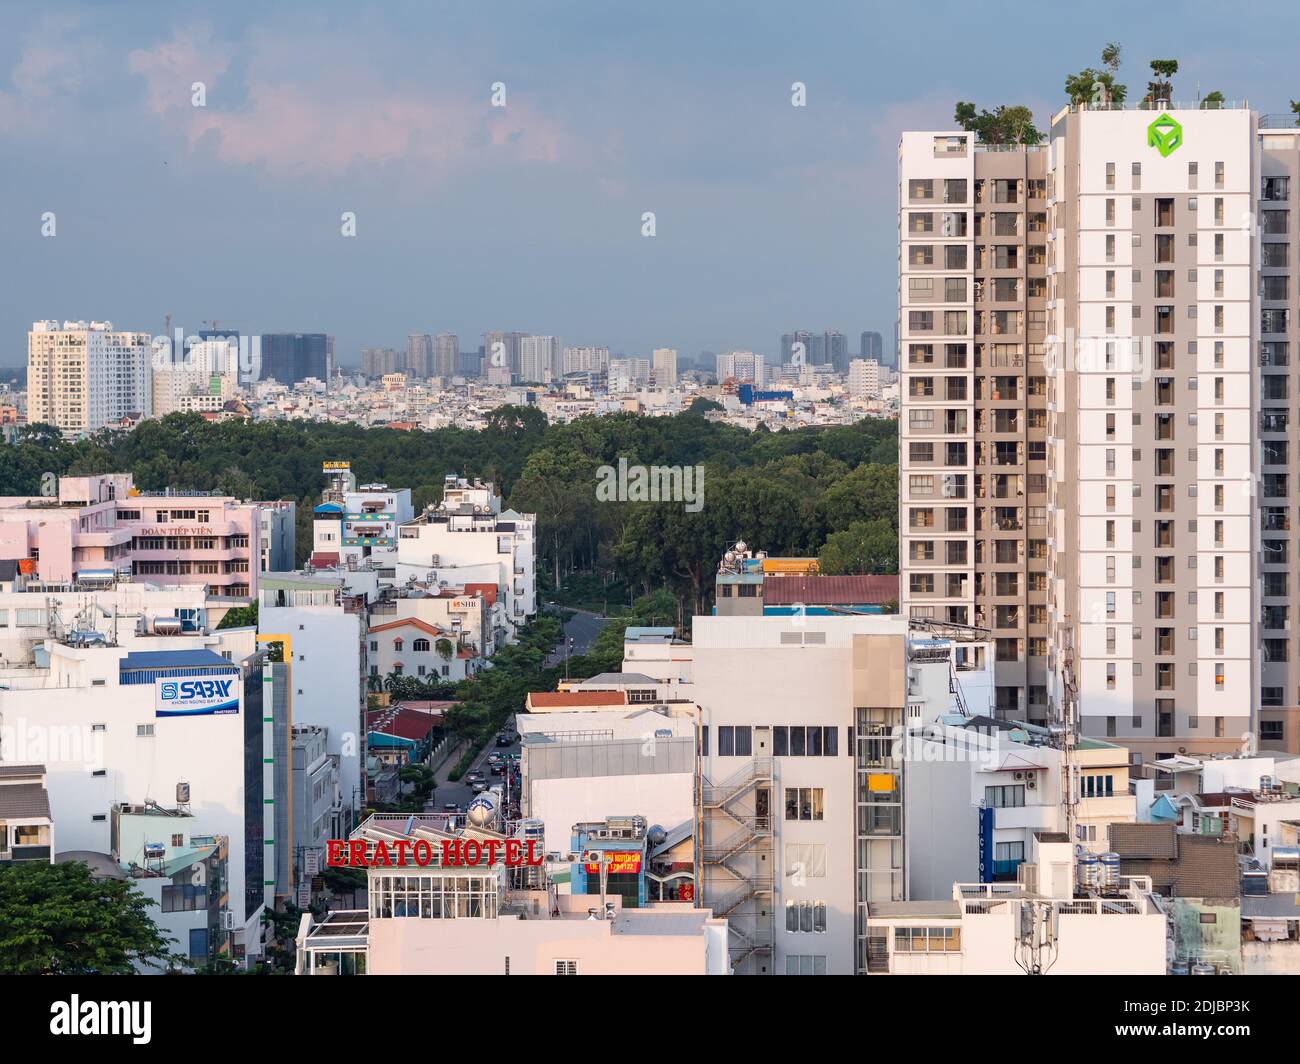 View of Phu Nhuan District in Ho Chi Minh City, Vietnam with Cong Vien Gia Dinh Park in the centre of the photo. Stock Photo